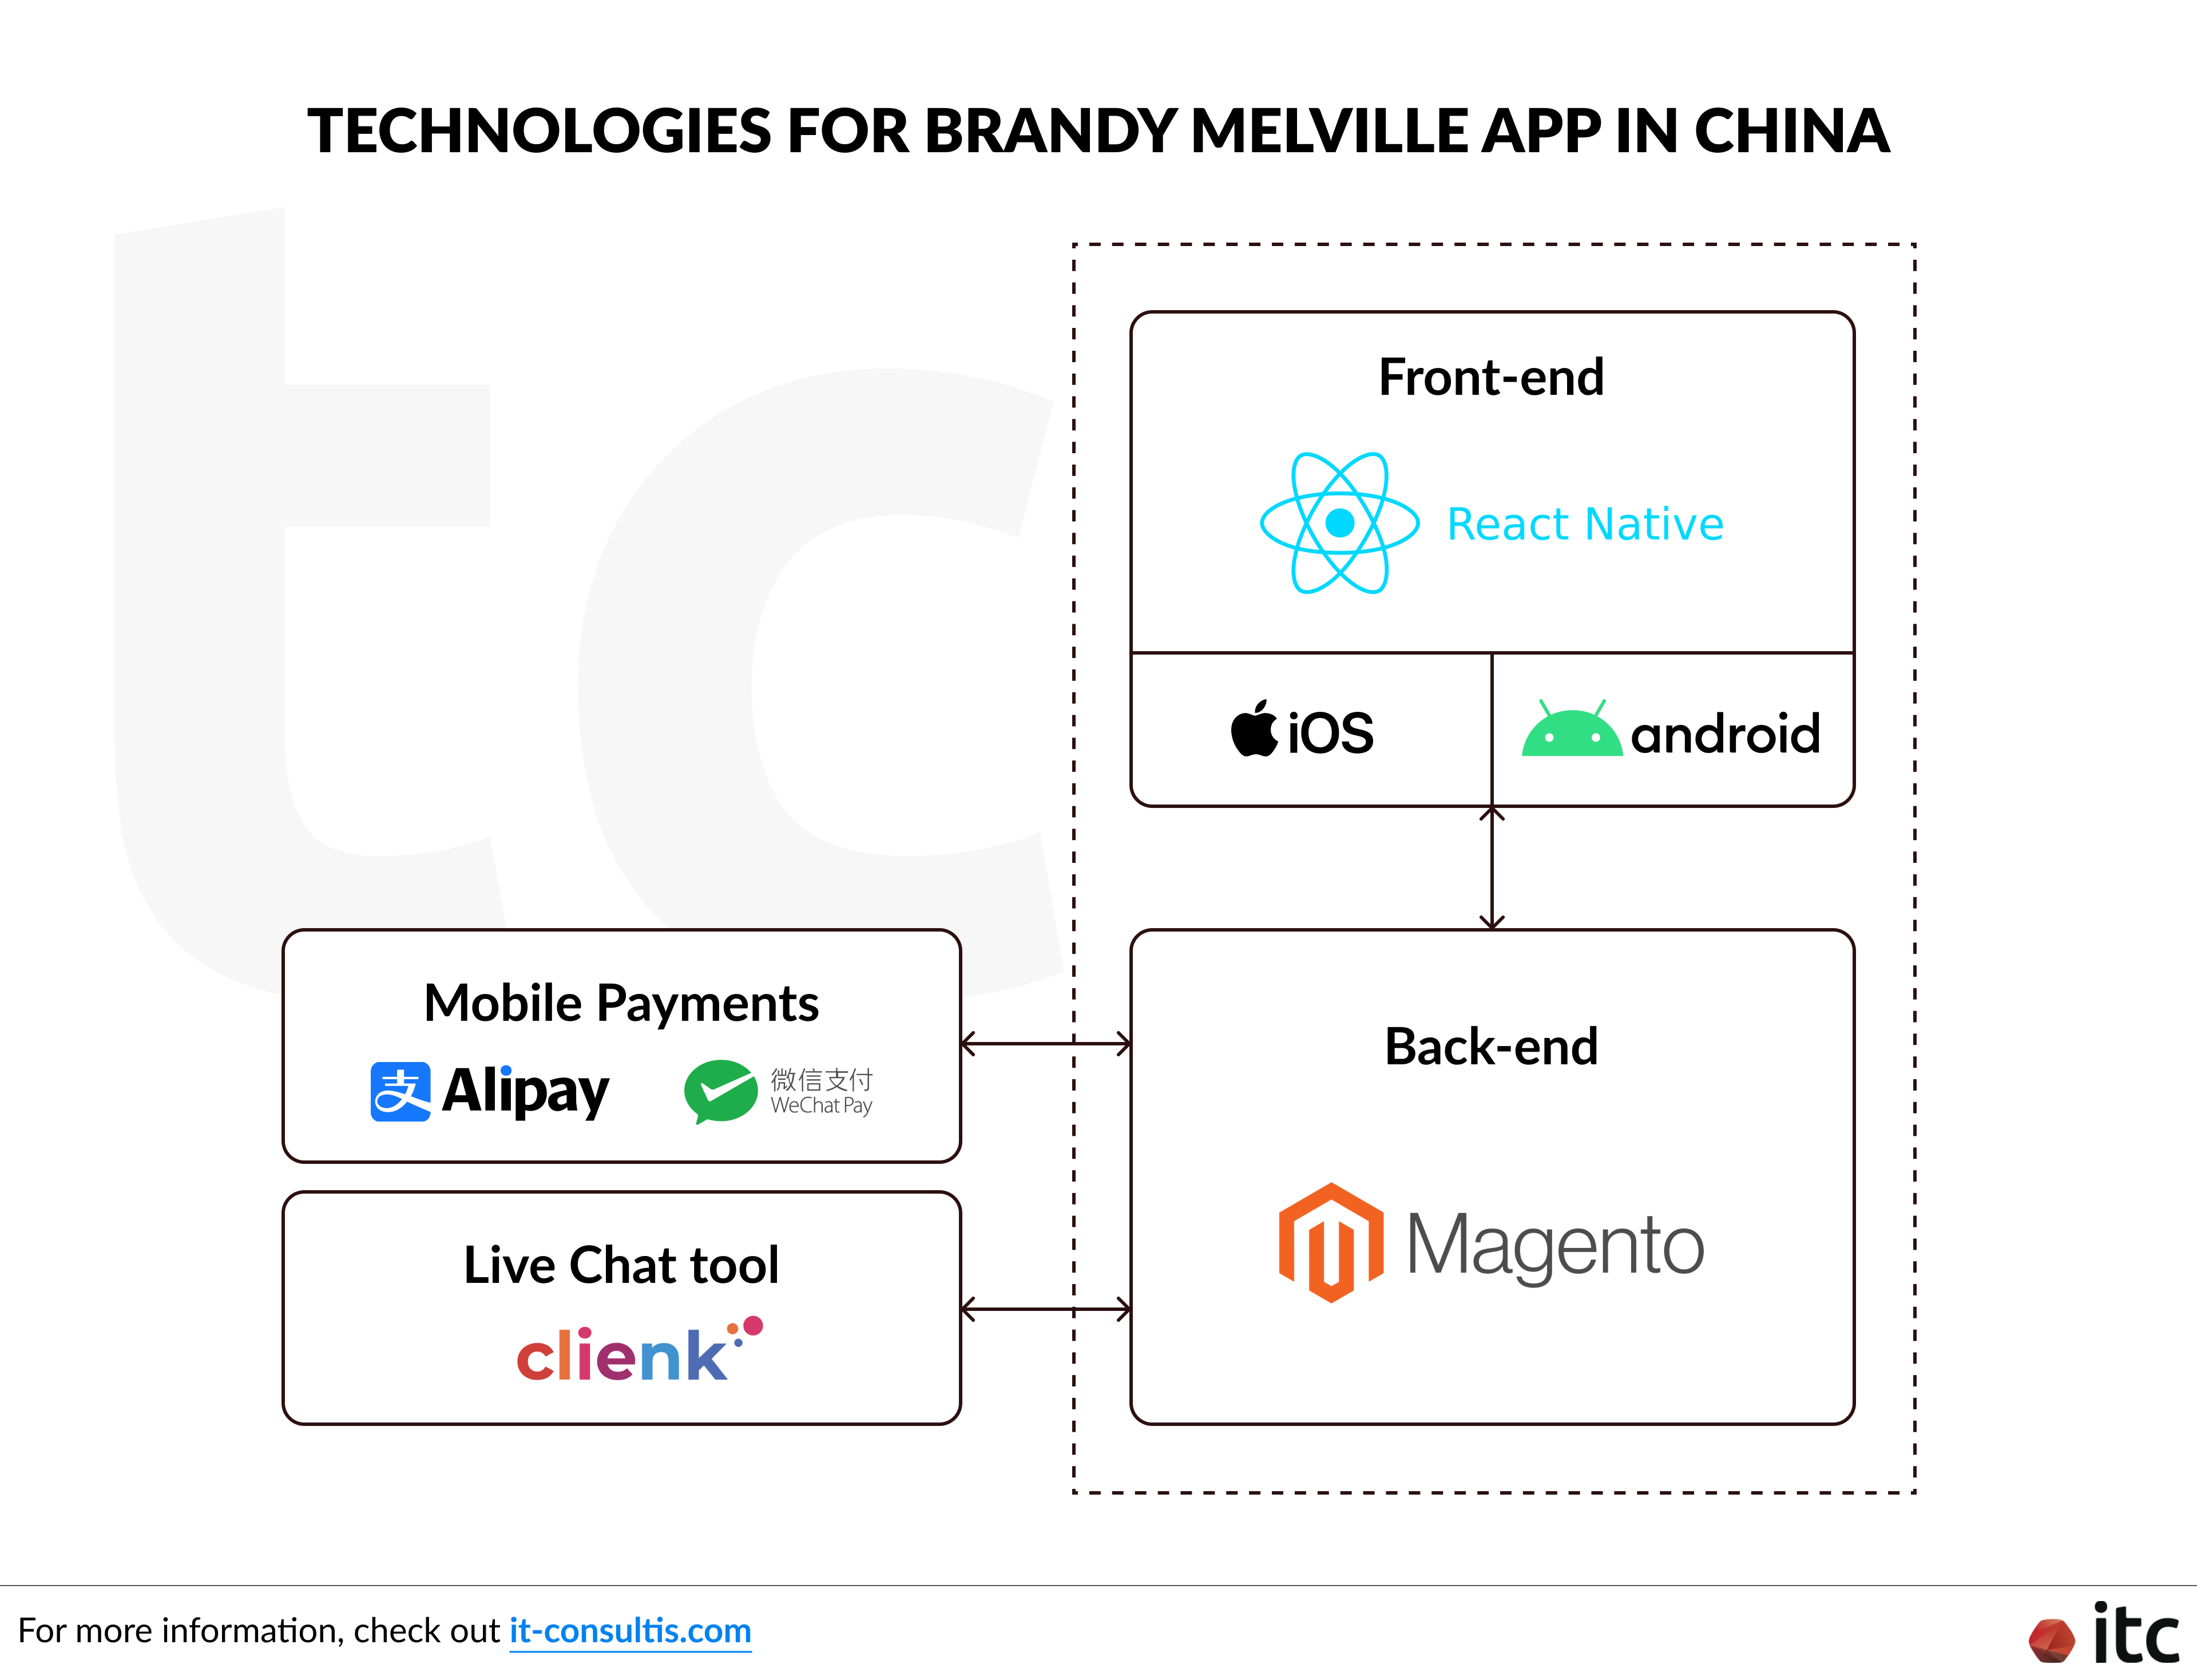 Technologies for Brandy Melville app in China